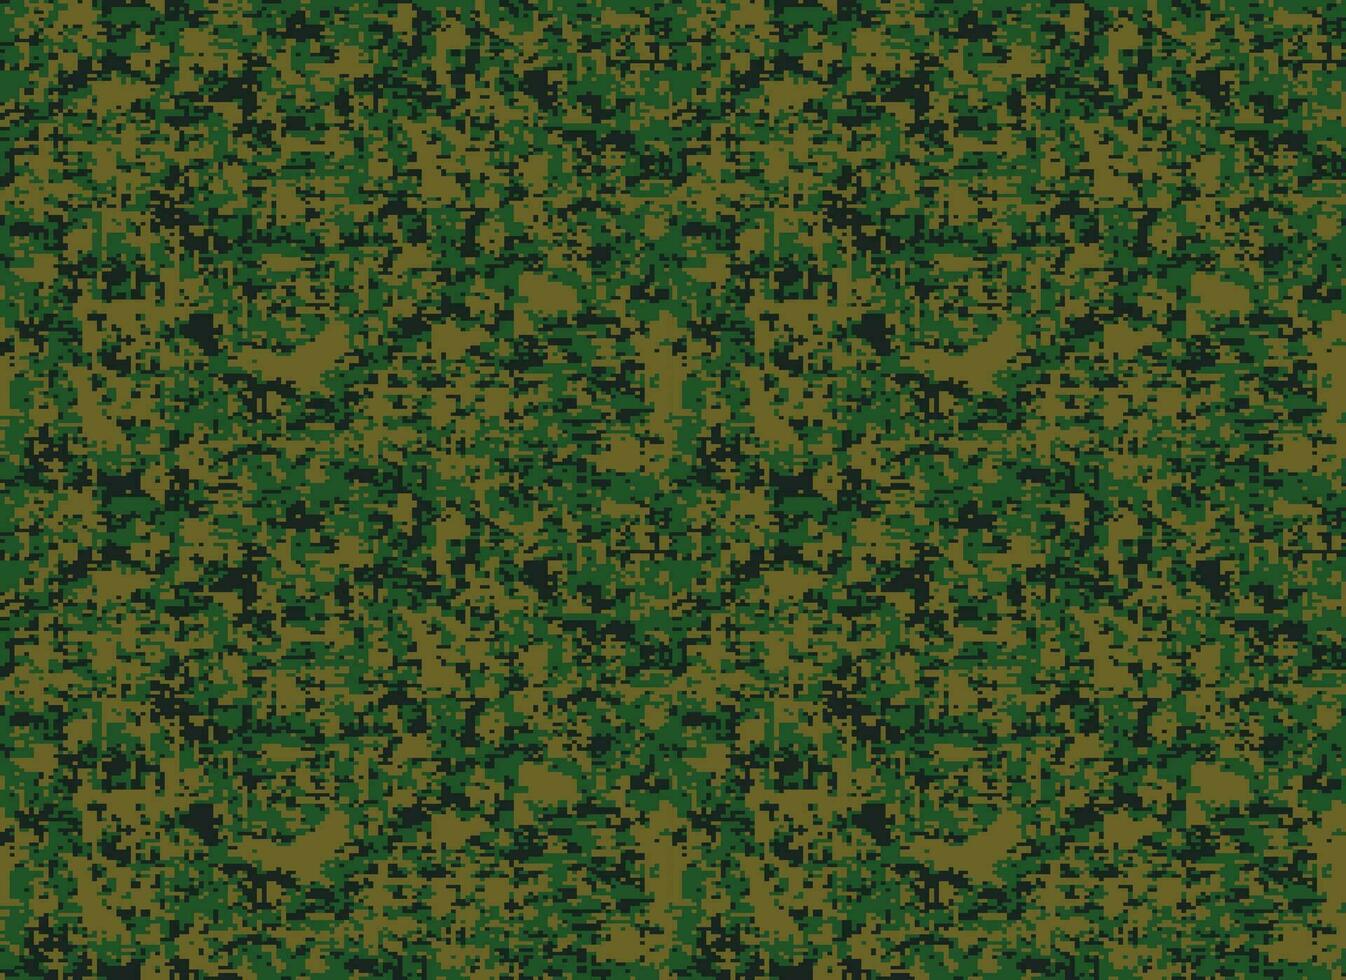 Marine marpat camo pattern for wallpaper or print material textile for tropic forest multi terrain camouflage vector